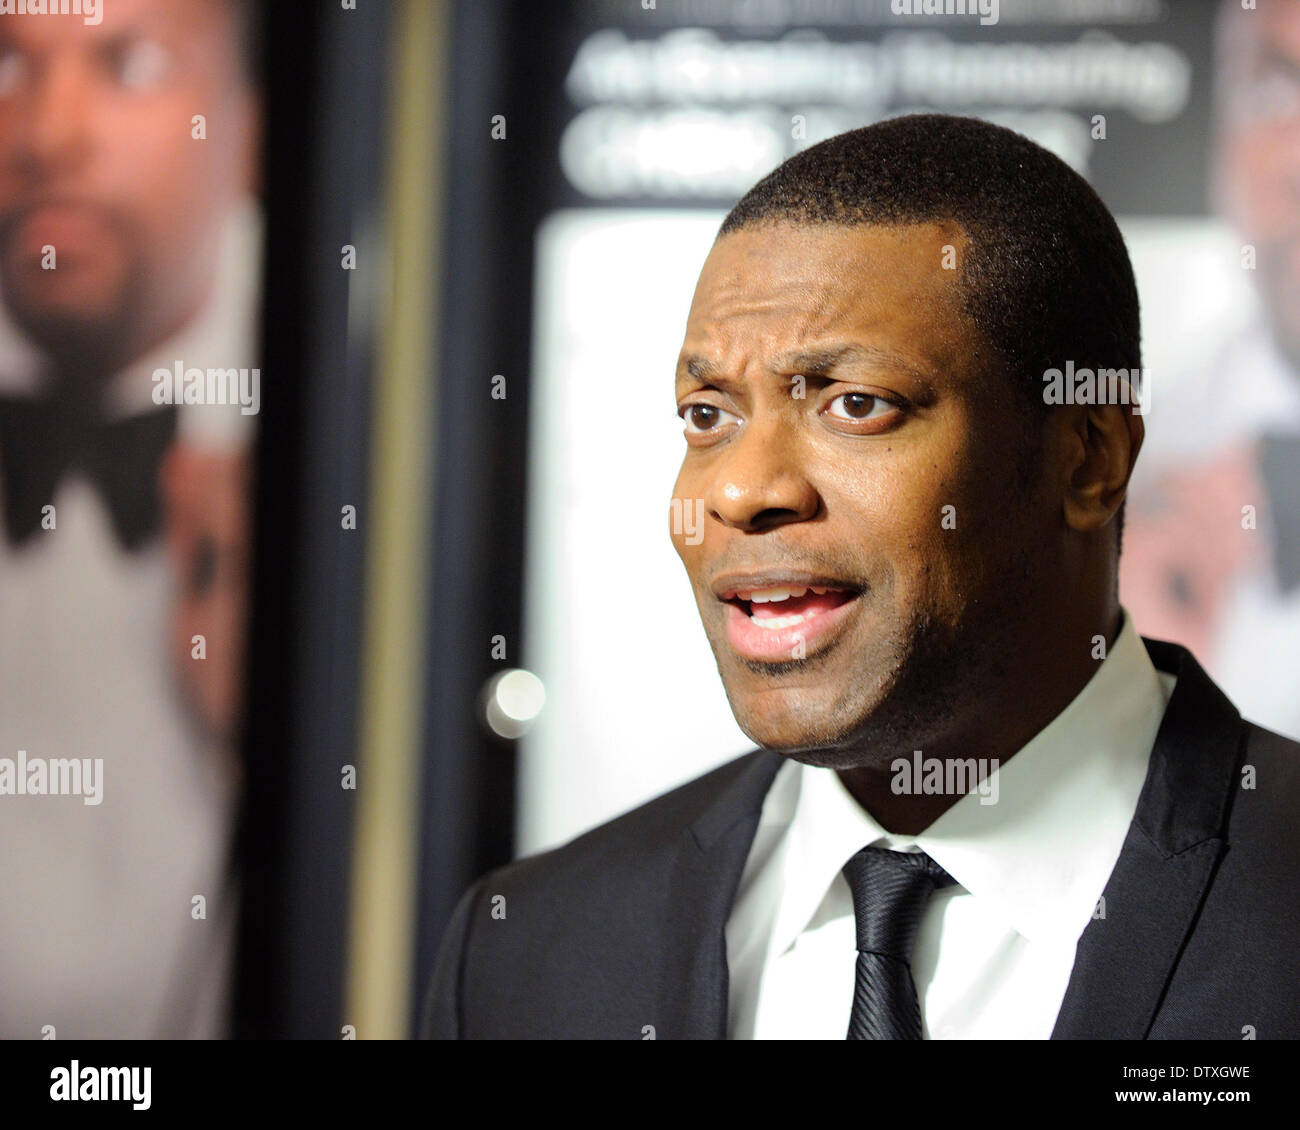 Toronto, Canada. 24th Feb 2014. In celebration of Black History Month, CFC presents An Evening Honouring Chris Tucker at the Cineplex Odeon Varsity and VIP Cinemas. Chris Tucker red carpet arrival. Credit:  EXImages/Alamy Live News Stock Photo